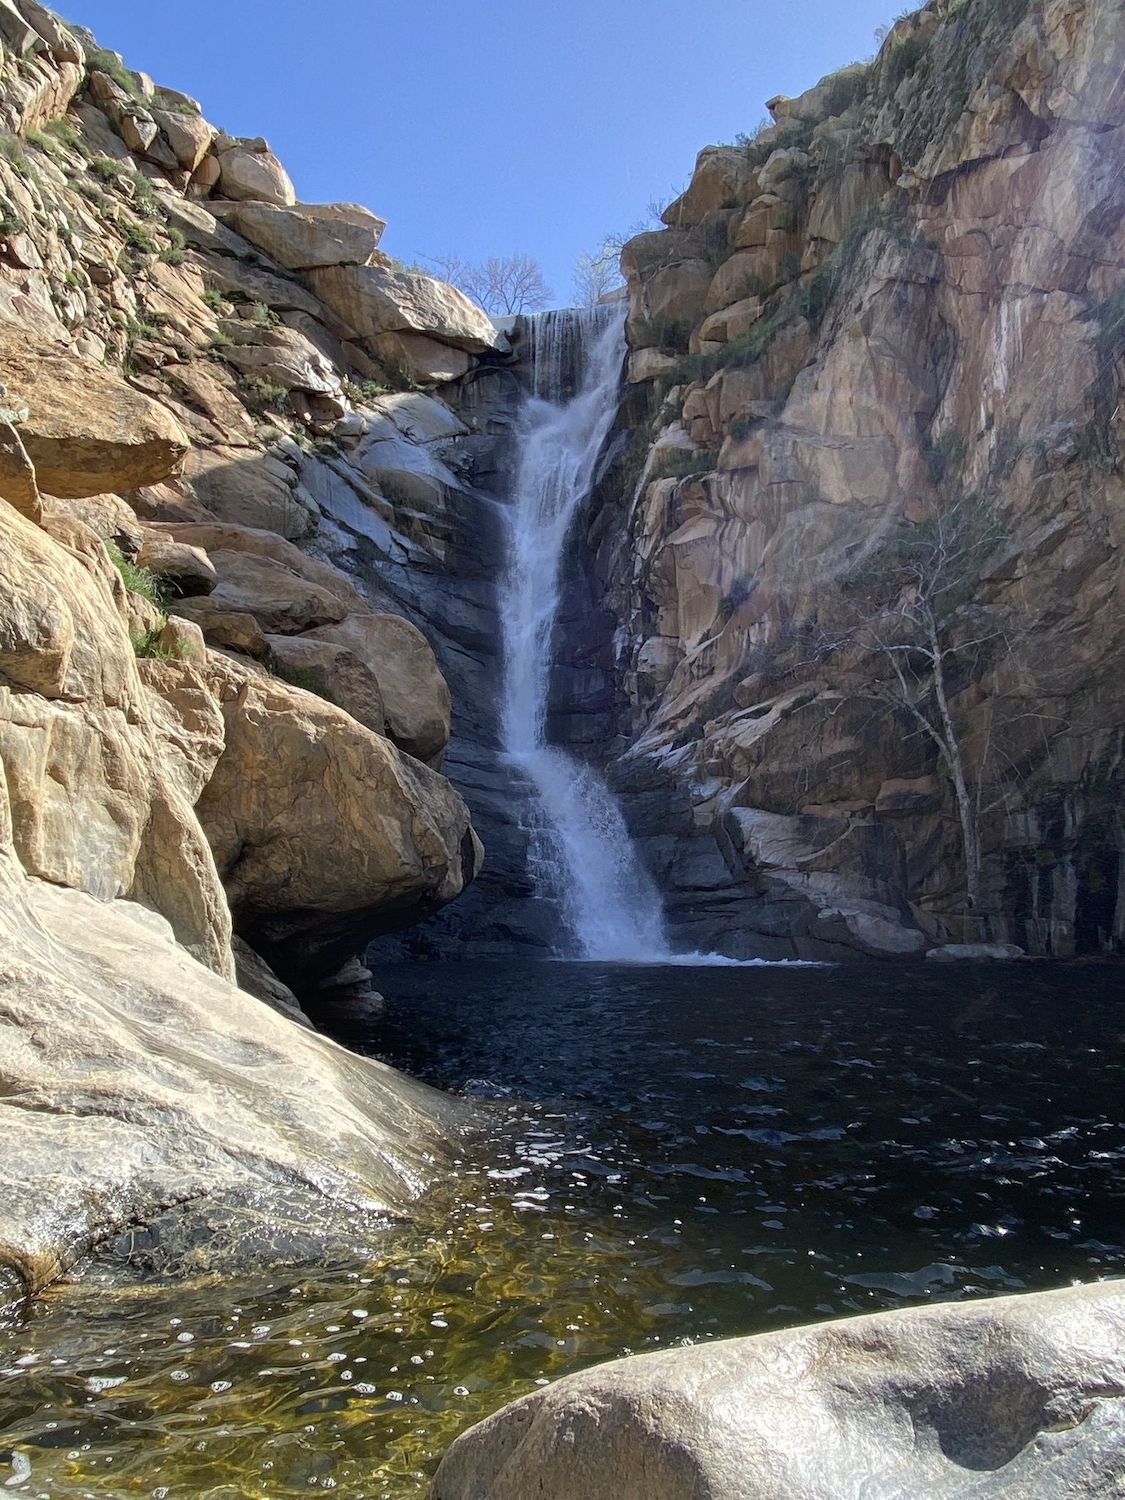 San Diego waterfall hike at Cedar Creek Falls near Alpine featuring a tall waterfall leading into a pond surrounded by boulders